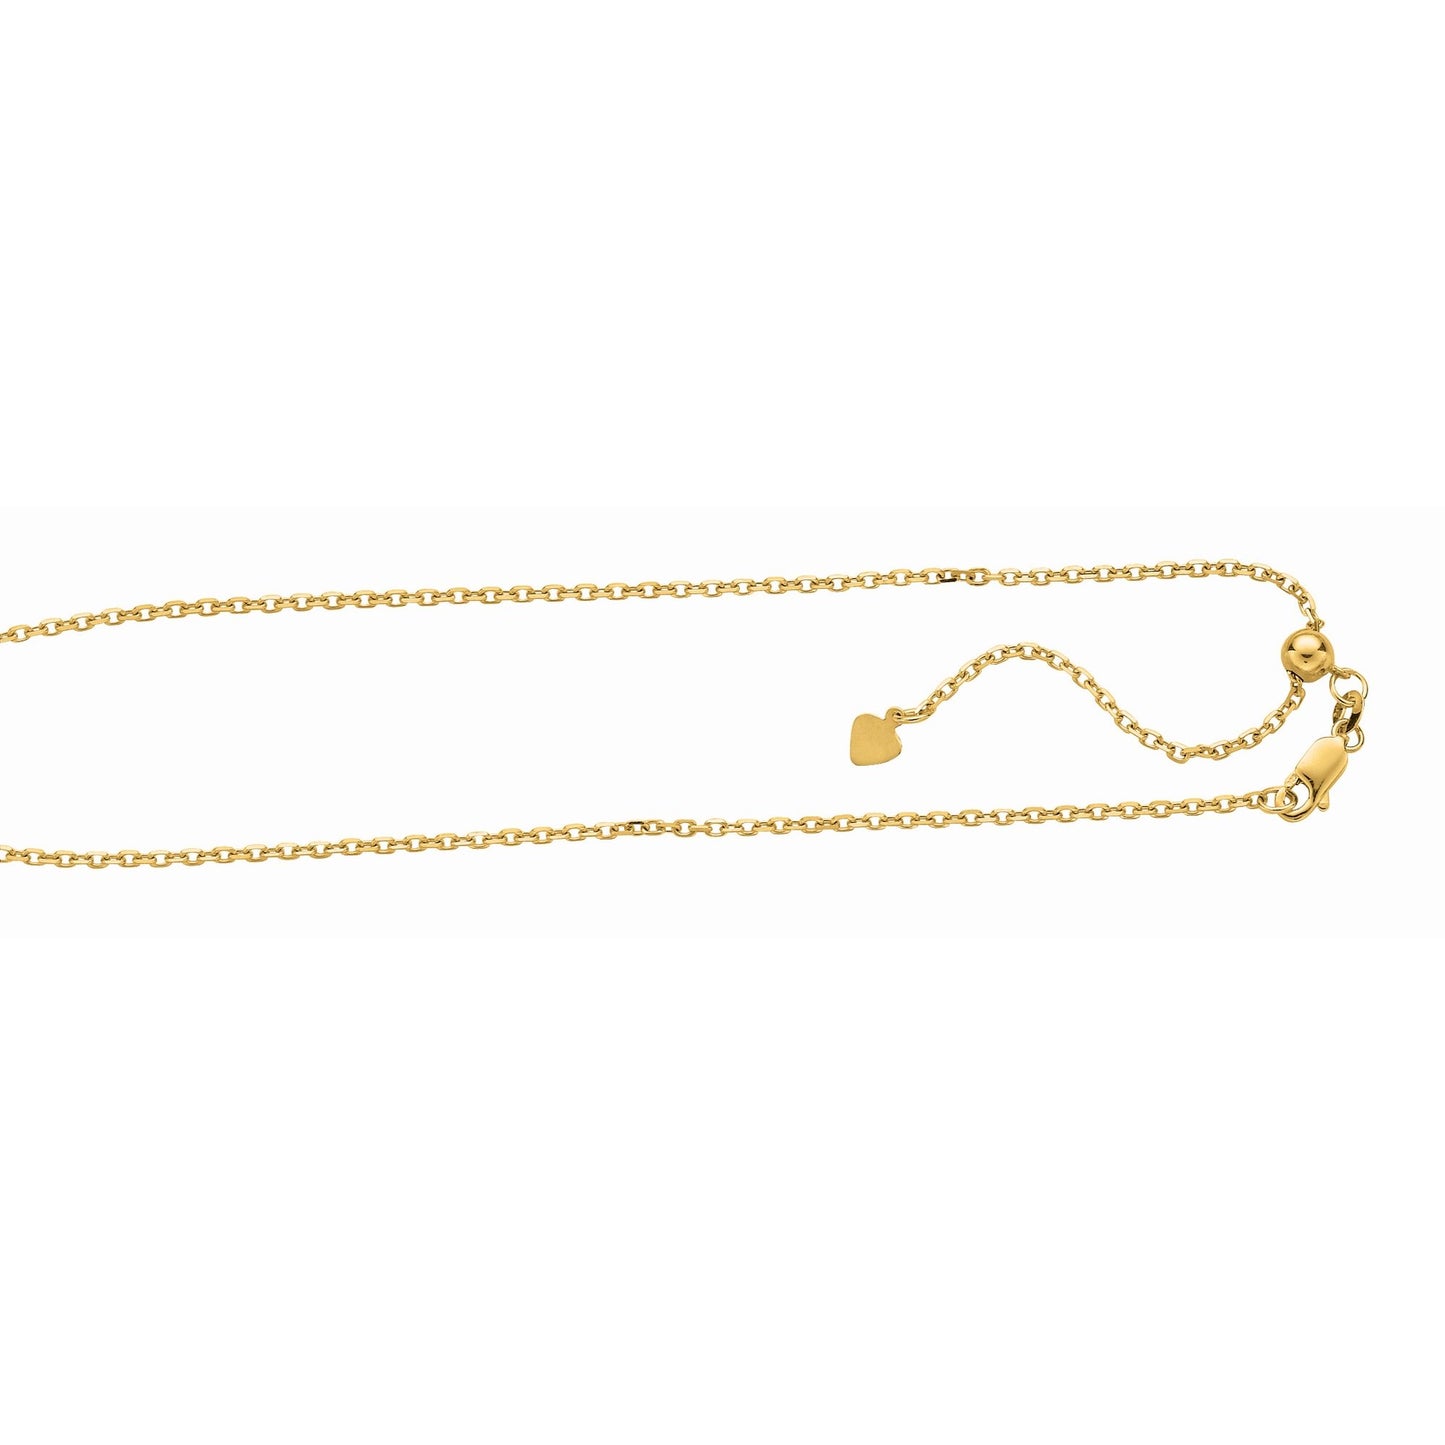 Adjustable Gold Cable Chain Necklace with Lobster Lock